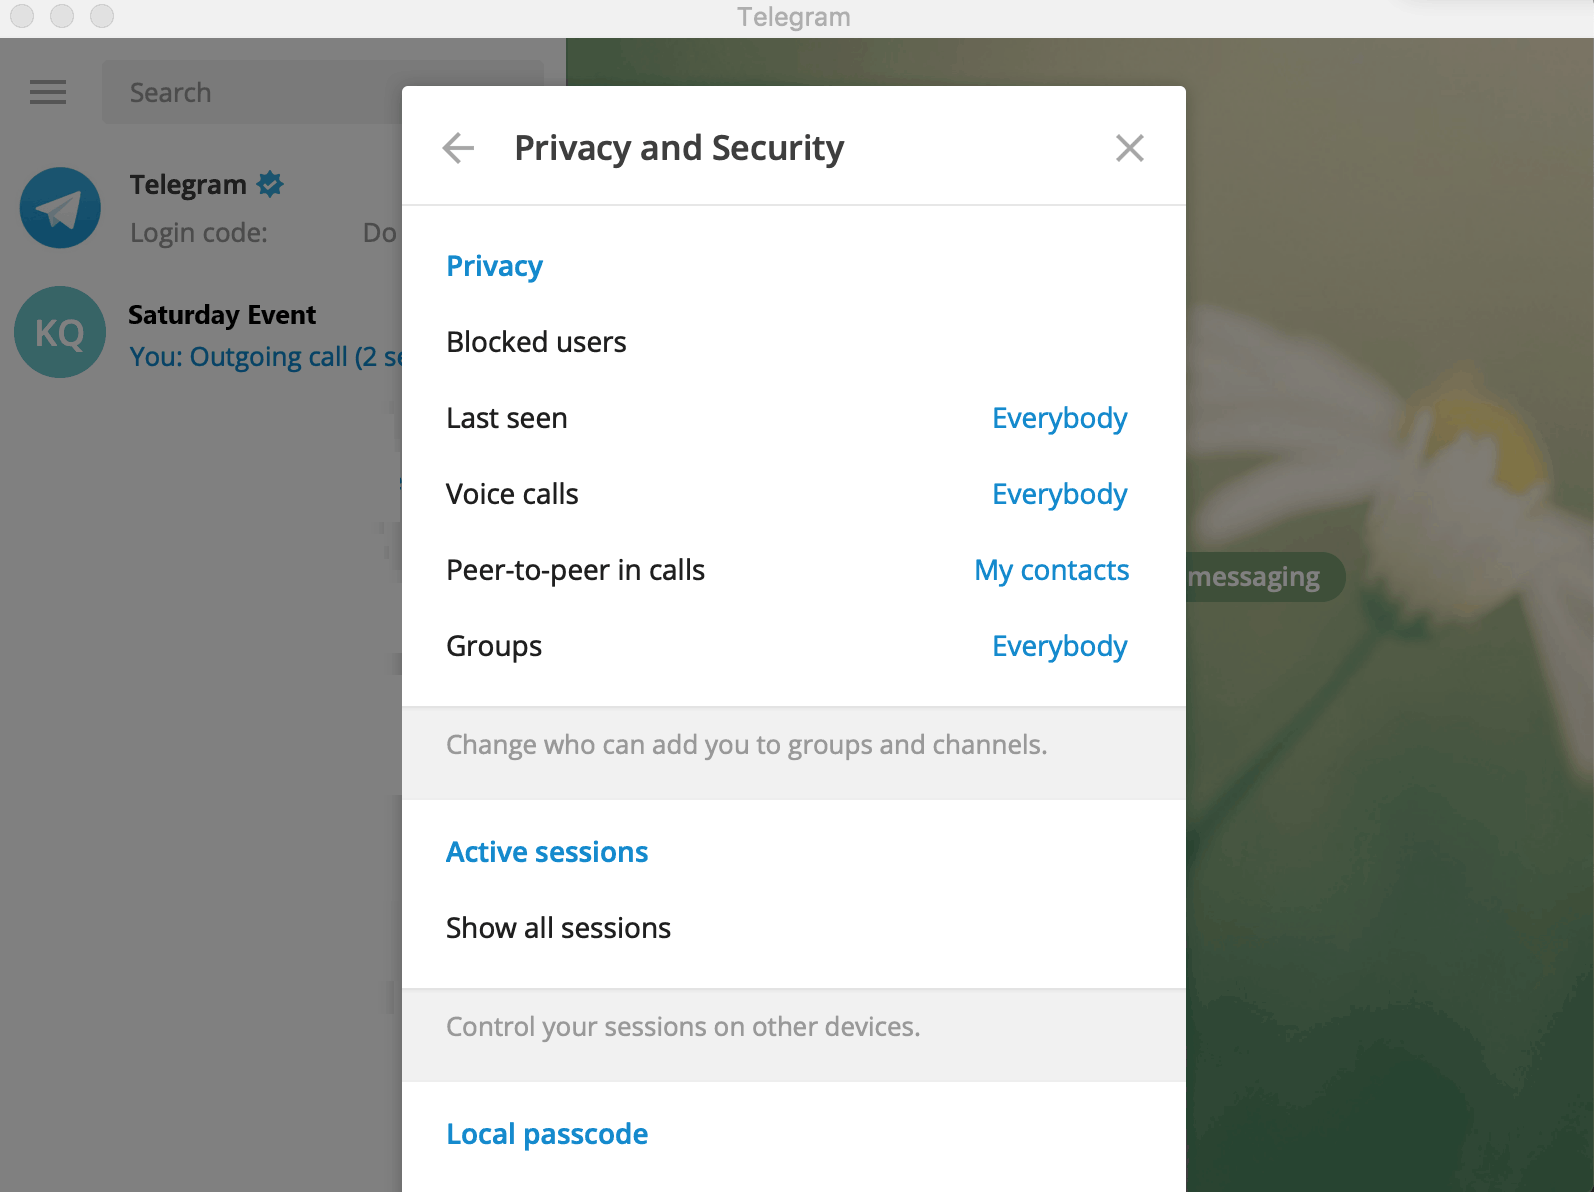 Telegram privacy and security settings